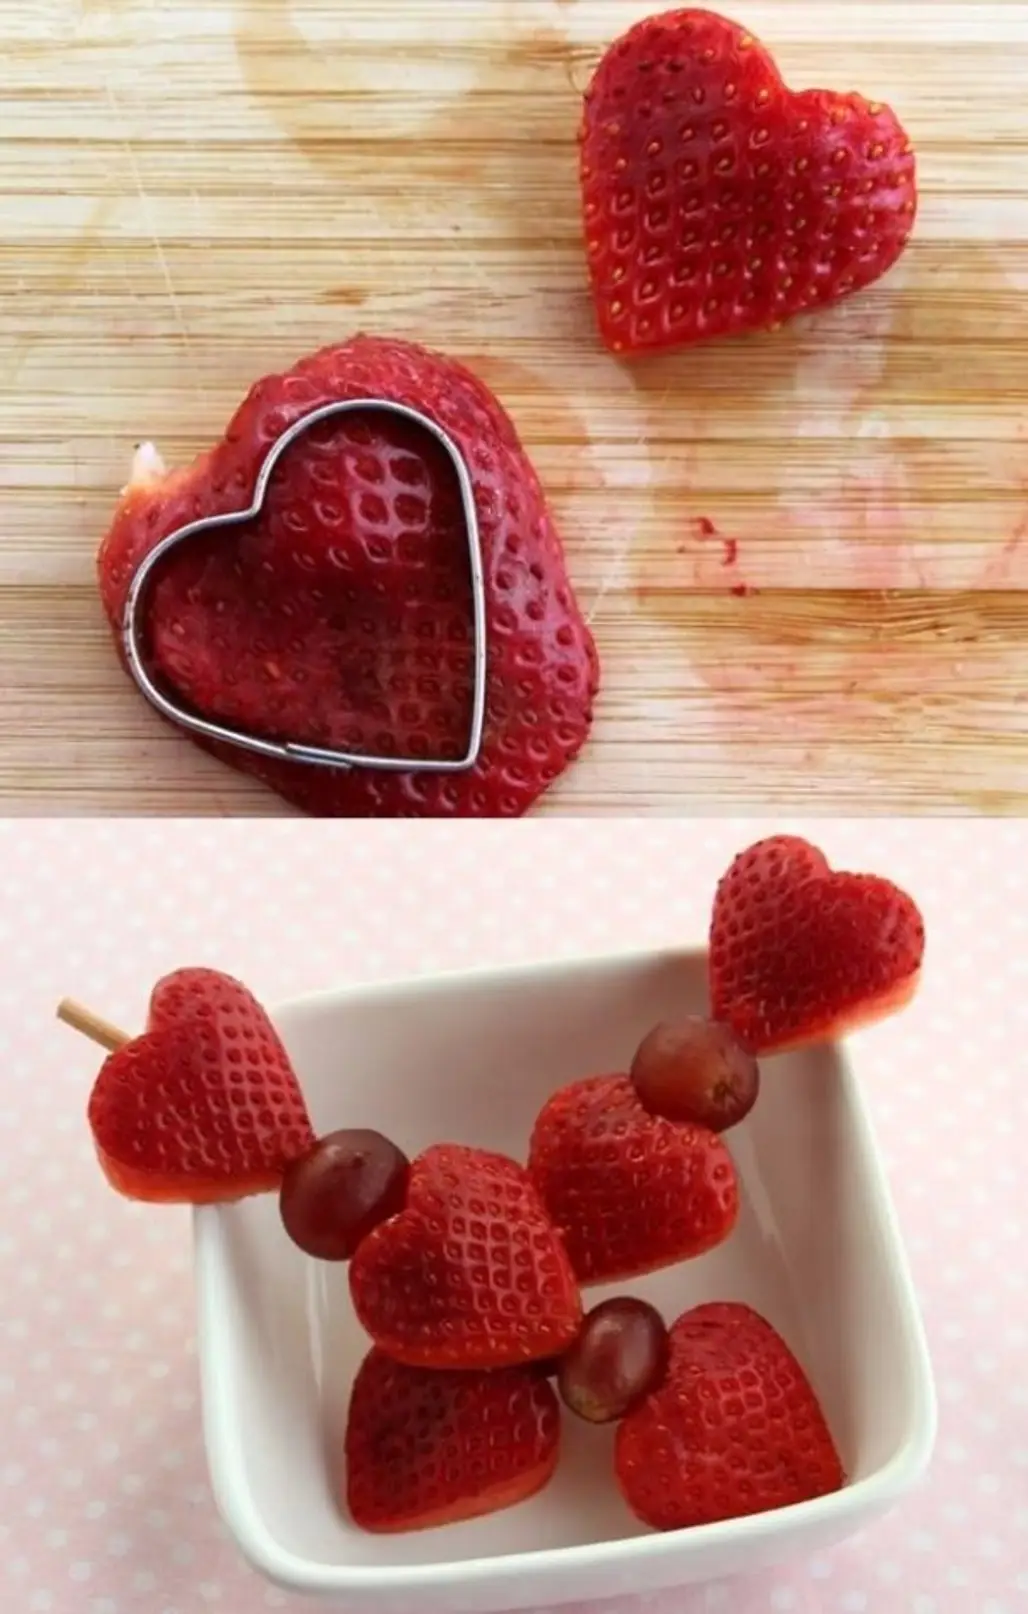 Hearty Strawberry Skewers